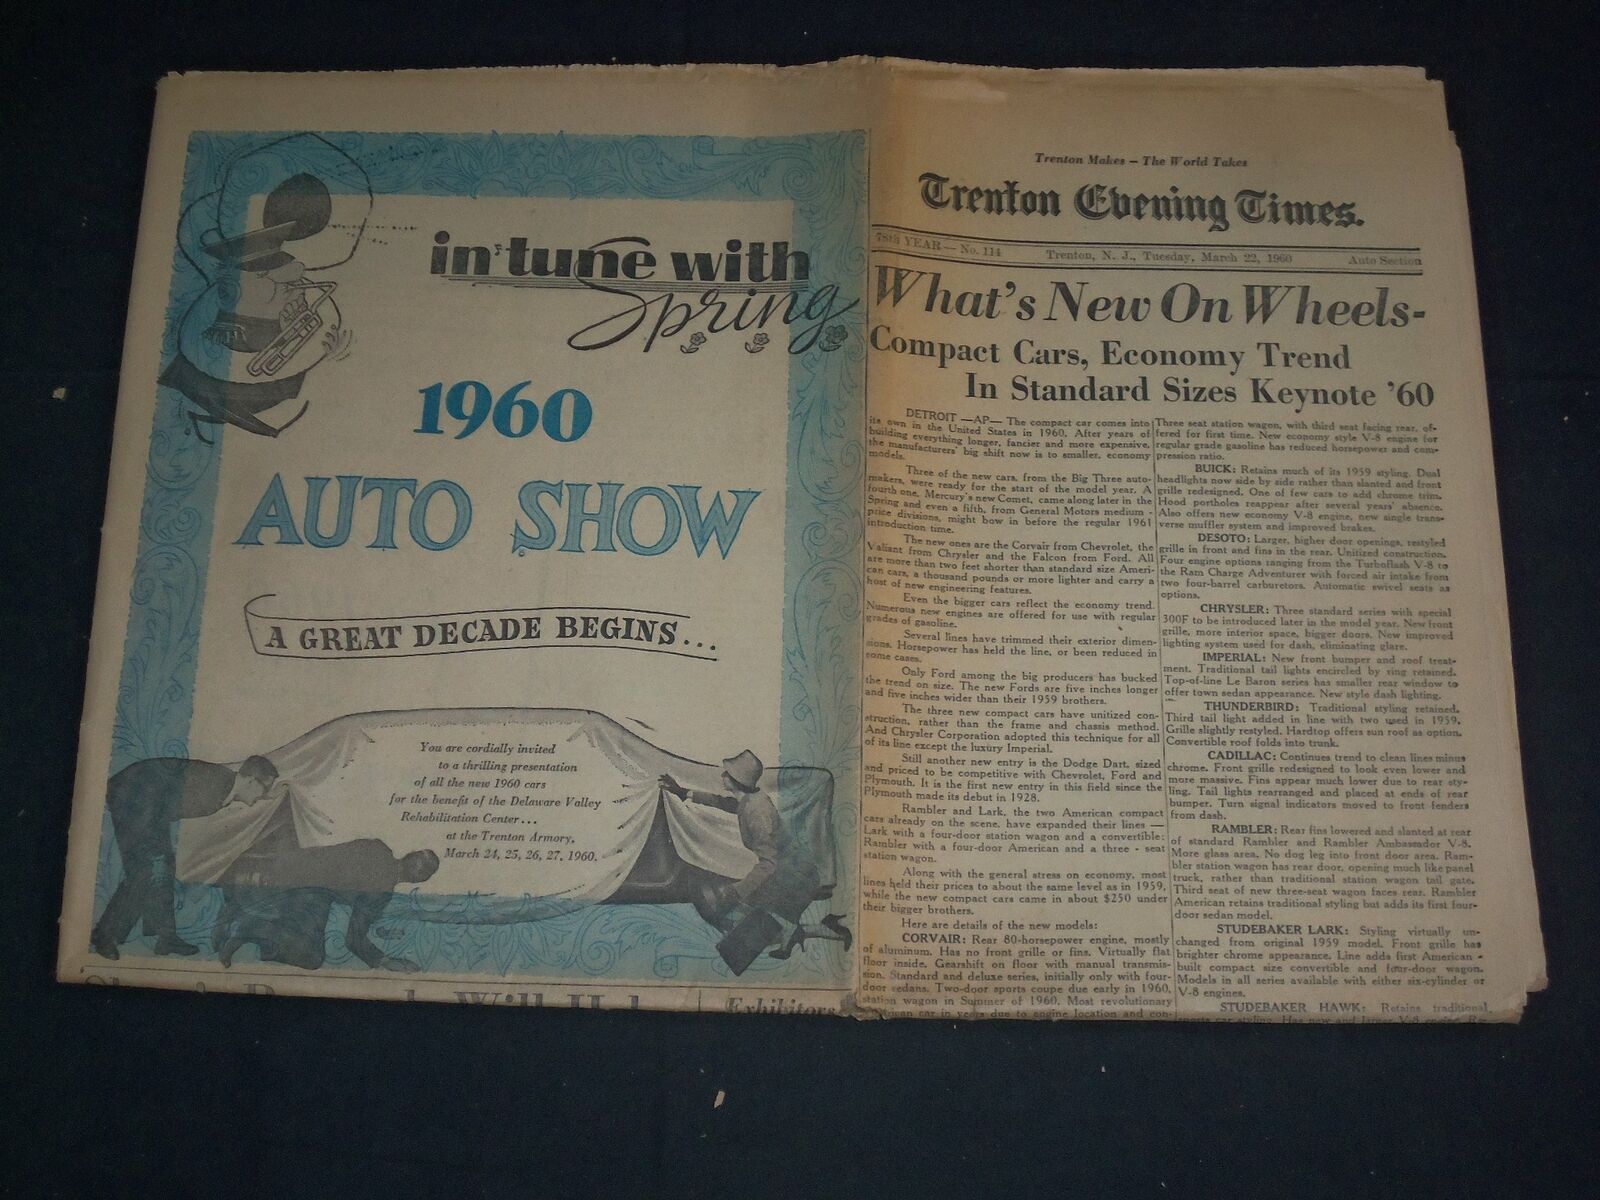 1960 MARCH 22 TRENTON EVENING TIMES NEWSPAPER - 1960 AUTO SHOW - NP 3381